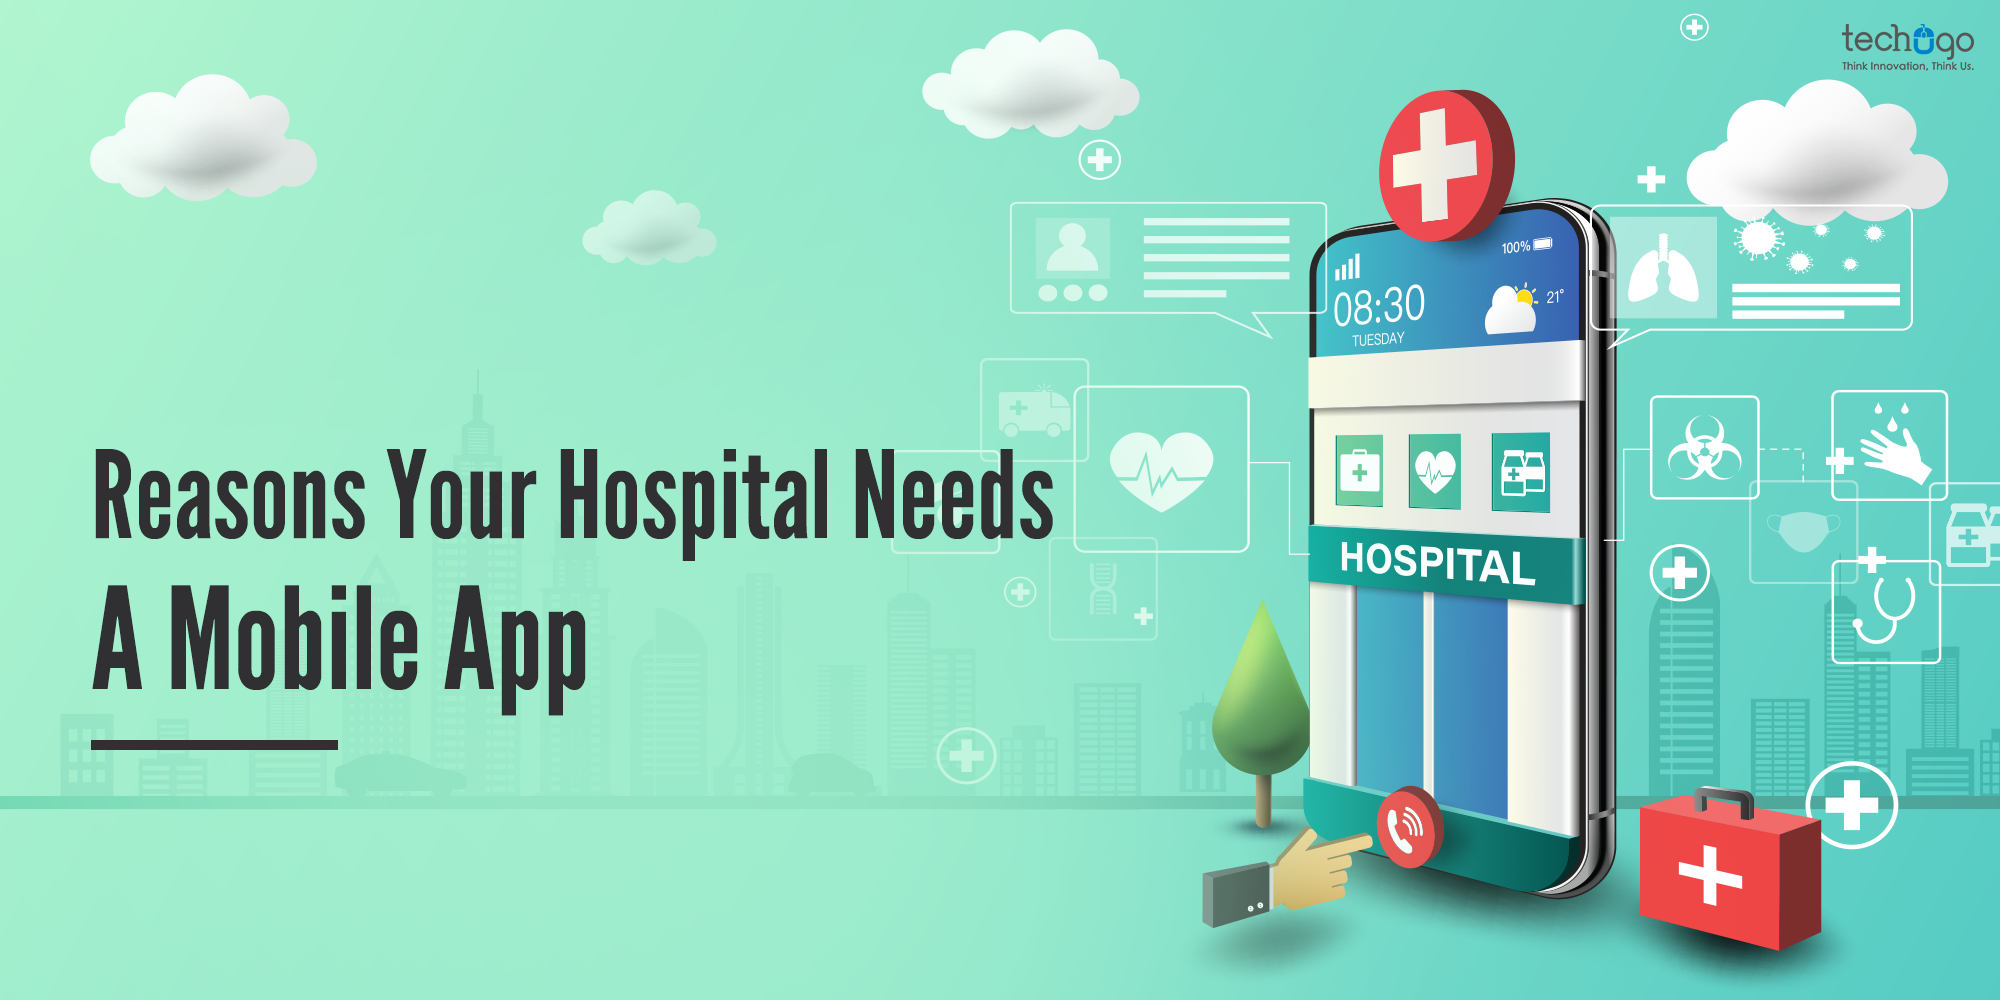 Reasons Your Hospital Needs A Mobile App